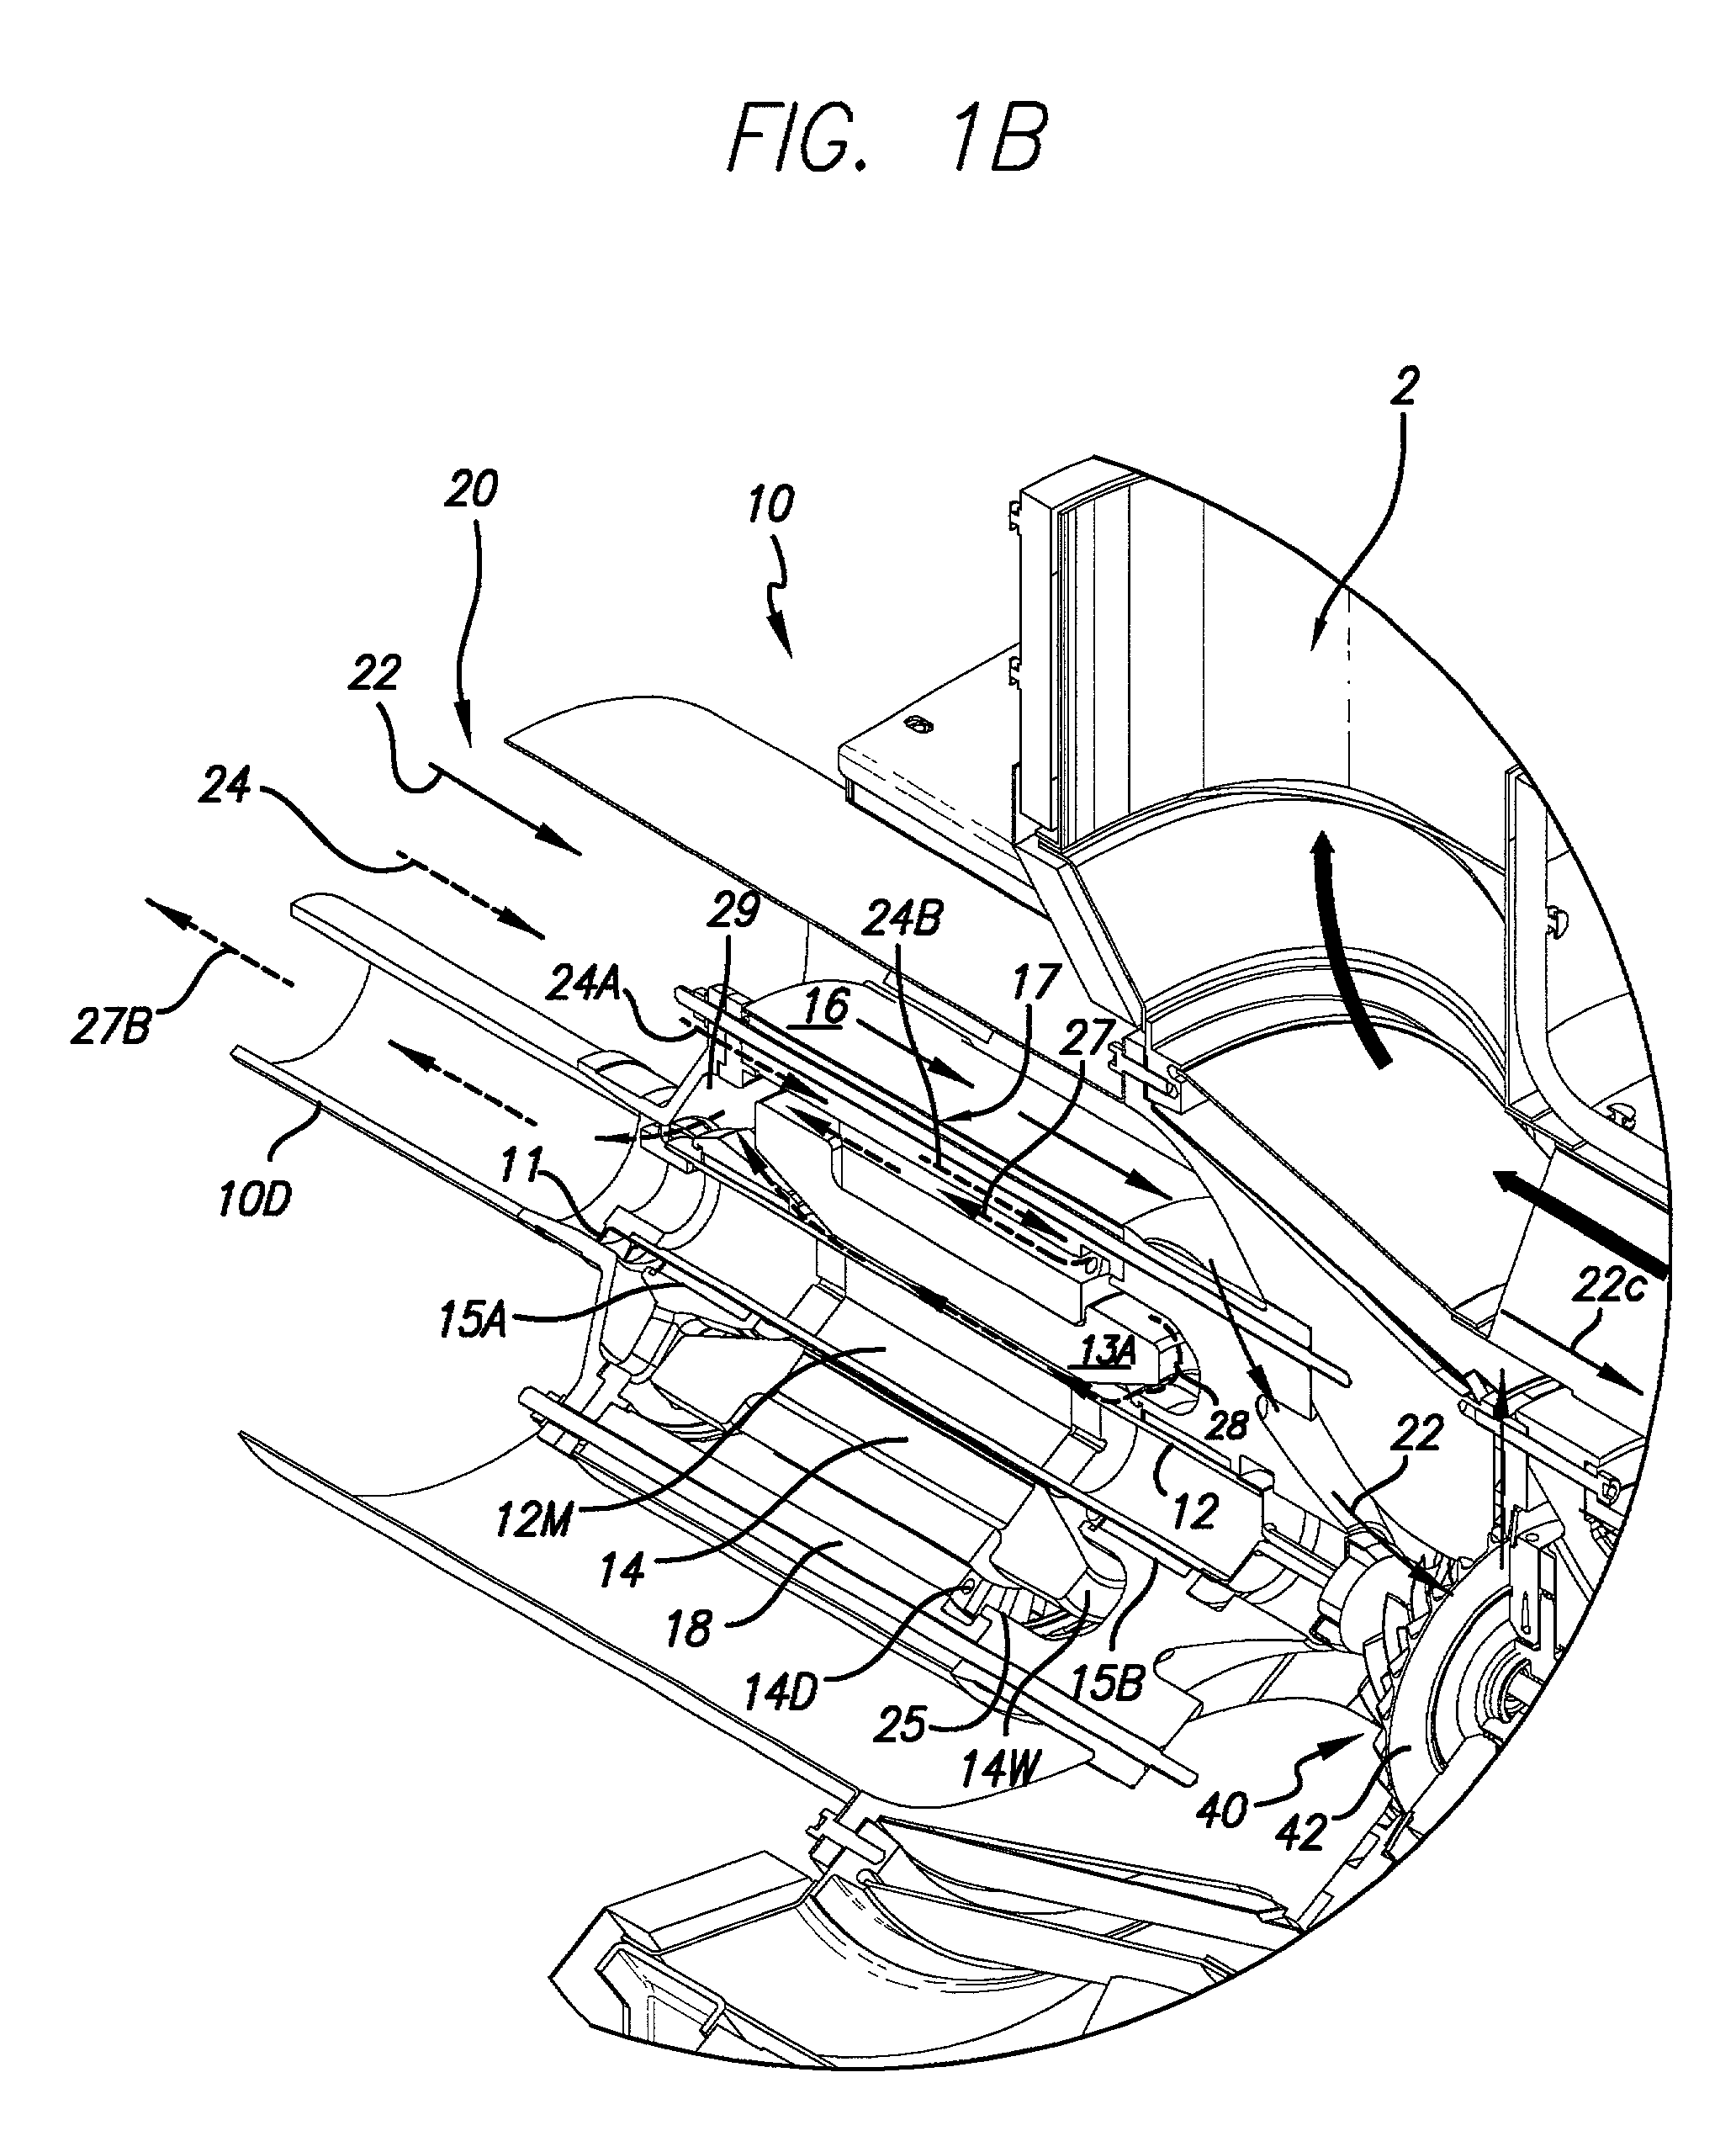 Transposed winding for random-wound electrical machines operating at high frequencies